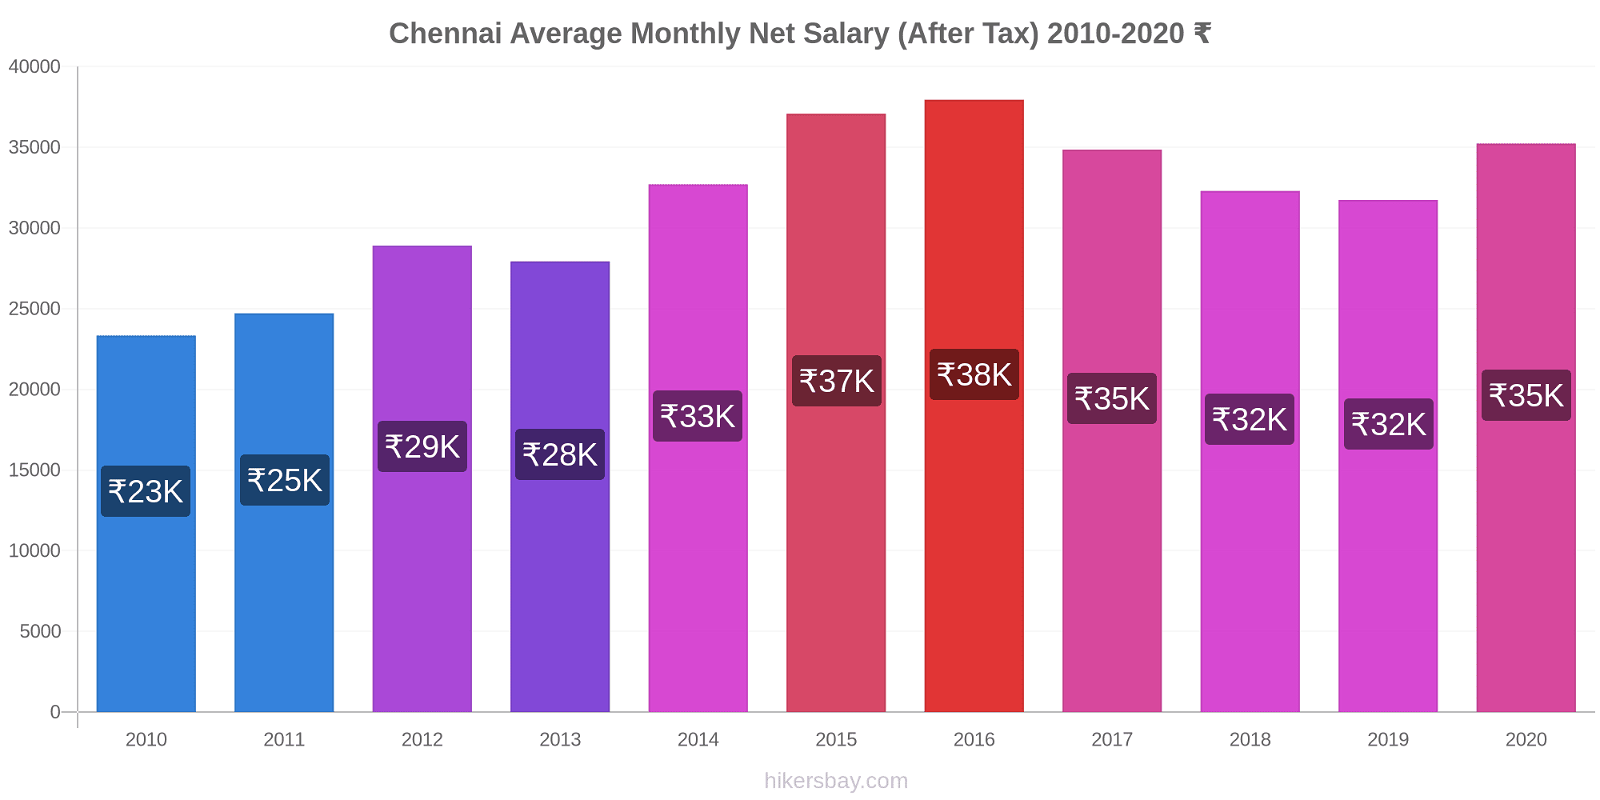 Chennai price changes Average Monthly Net Salary (After Tax) hikersbay.com